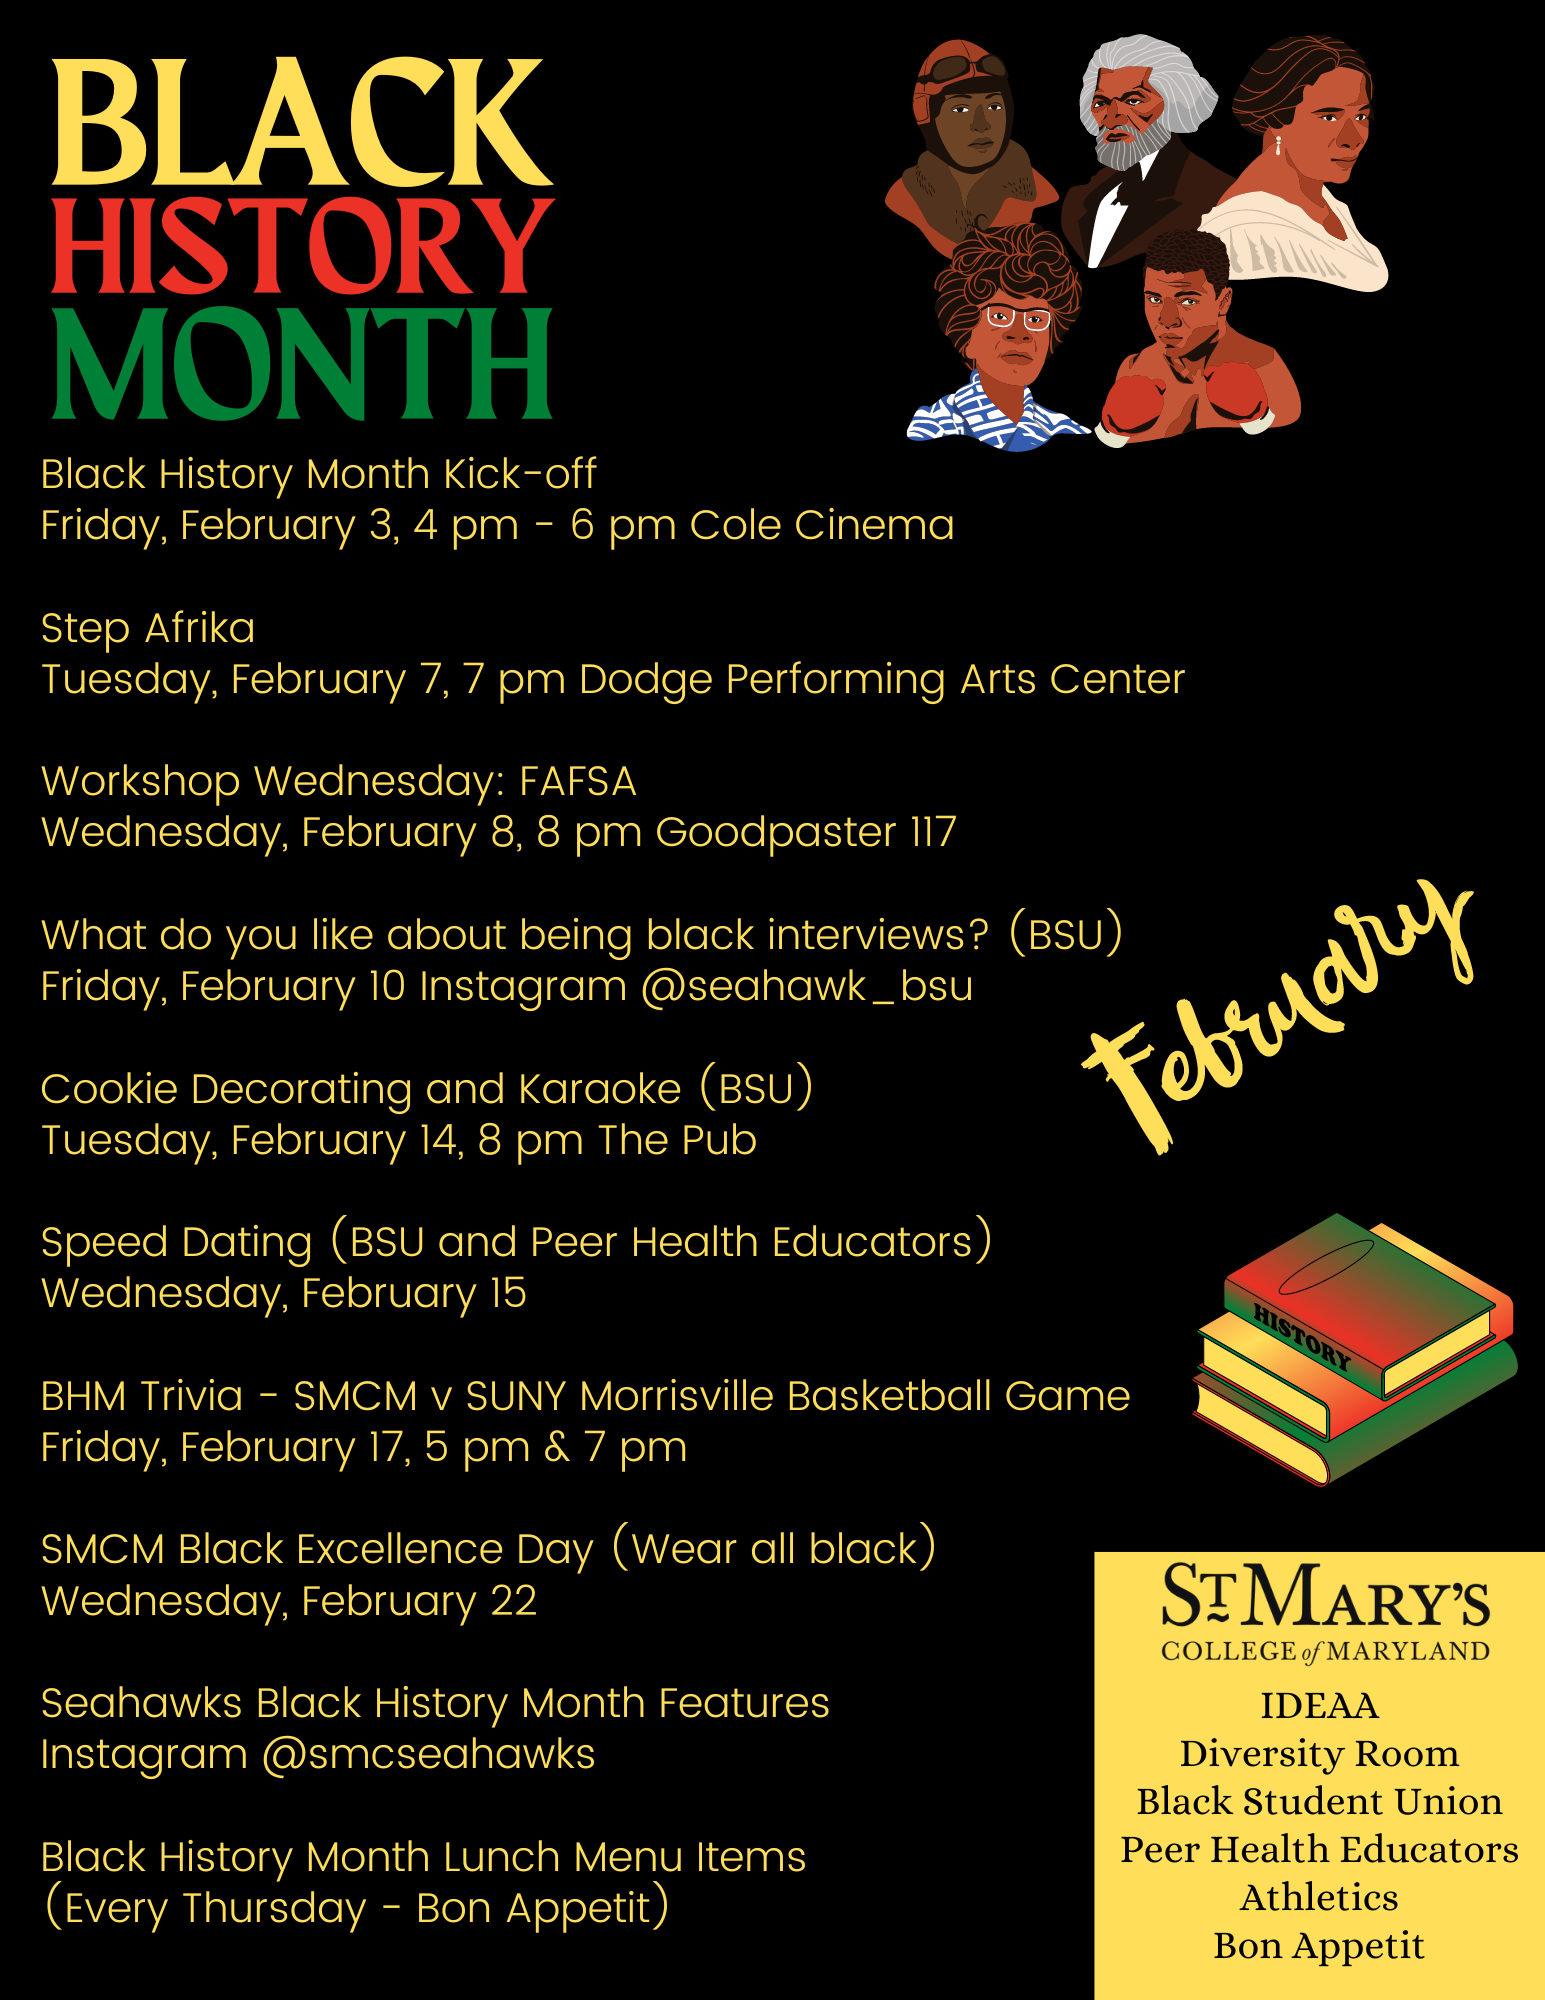 Black History Month Calendar St. Marys College of Maryland